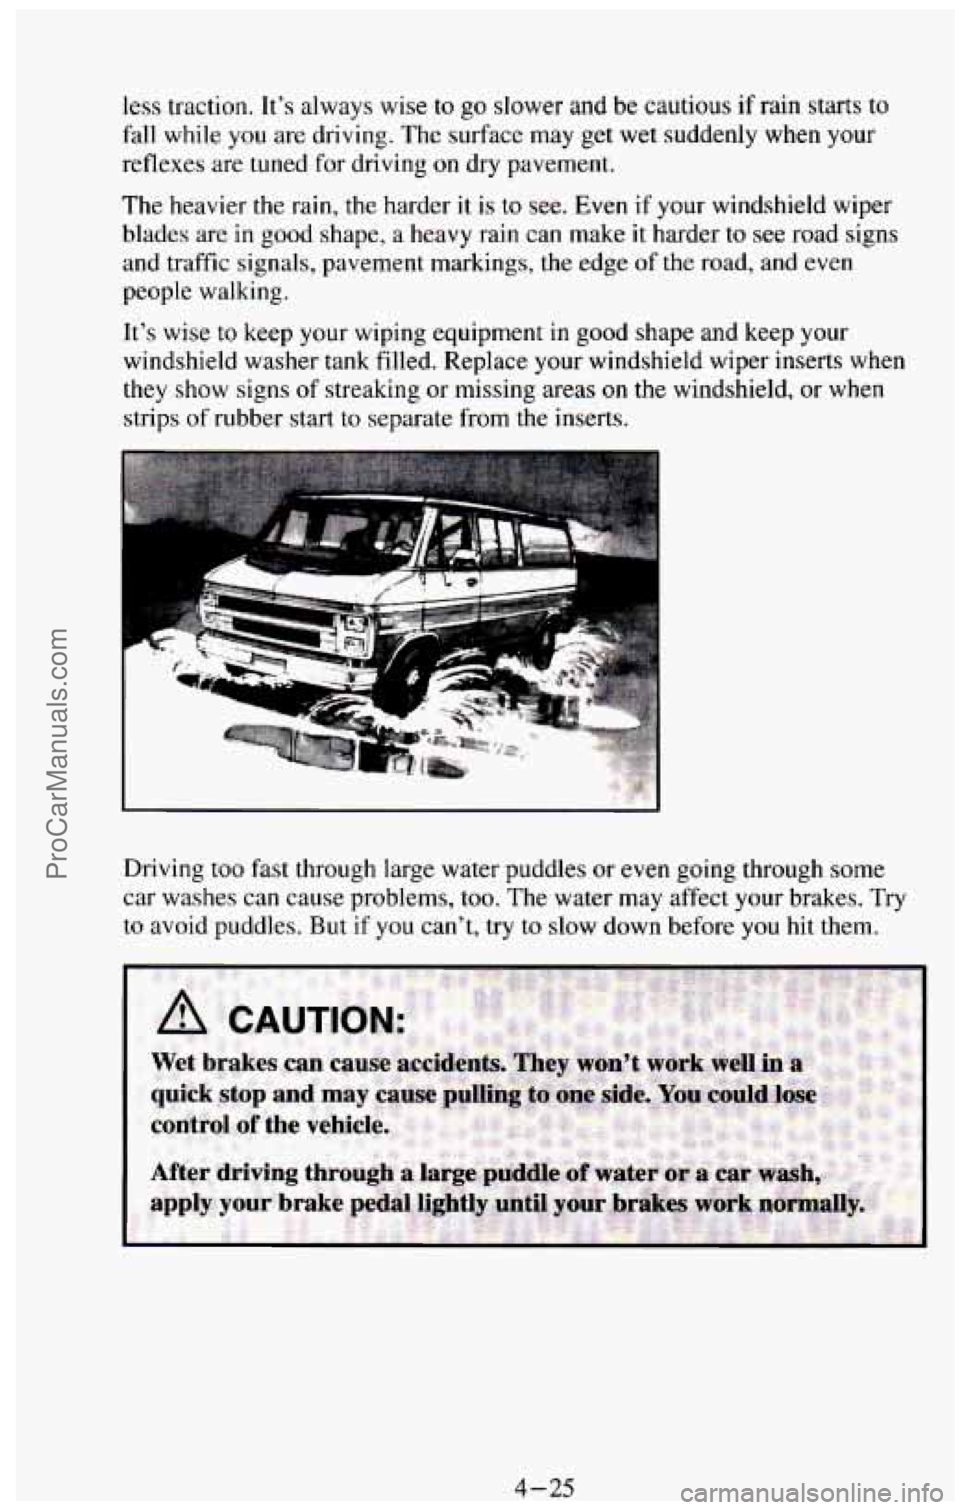 CHEVROLET SUBURBAN 1994  Owners Manual less traction. It’s always wise to go slower and be cautious if rain  starts  to 
fall while  you are driving.  The  surface  may get wet  suddenly  when  your 
reflexes are  tuned for  driving  on 